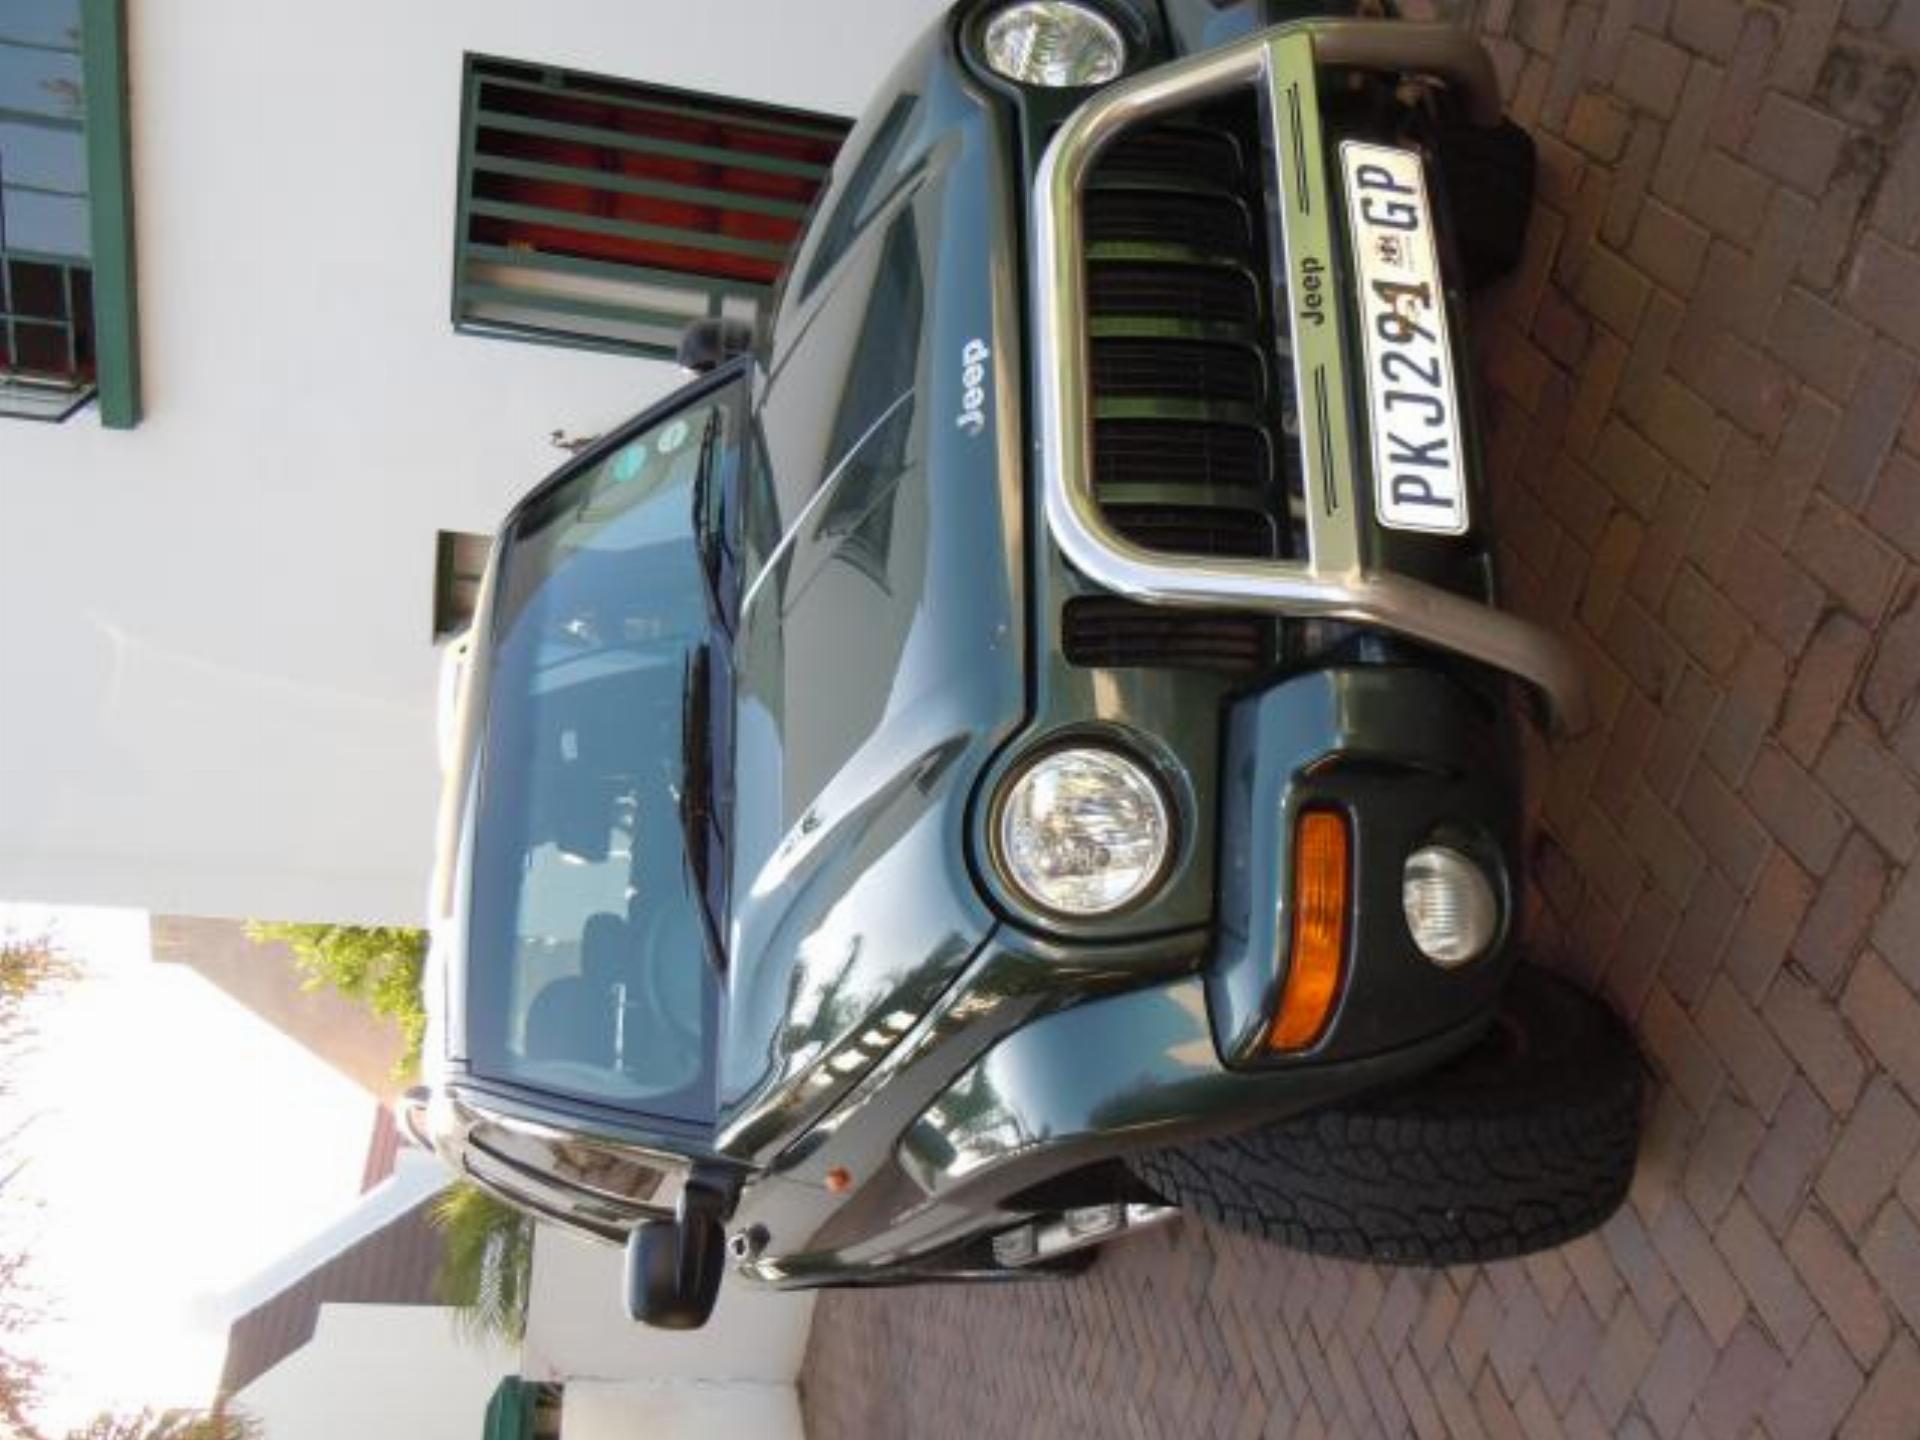 Jeep Cherokee 2.5 CRD Limited